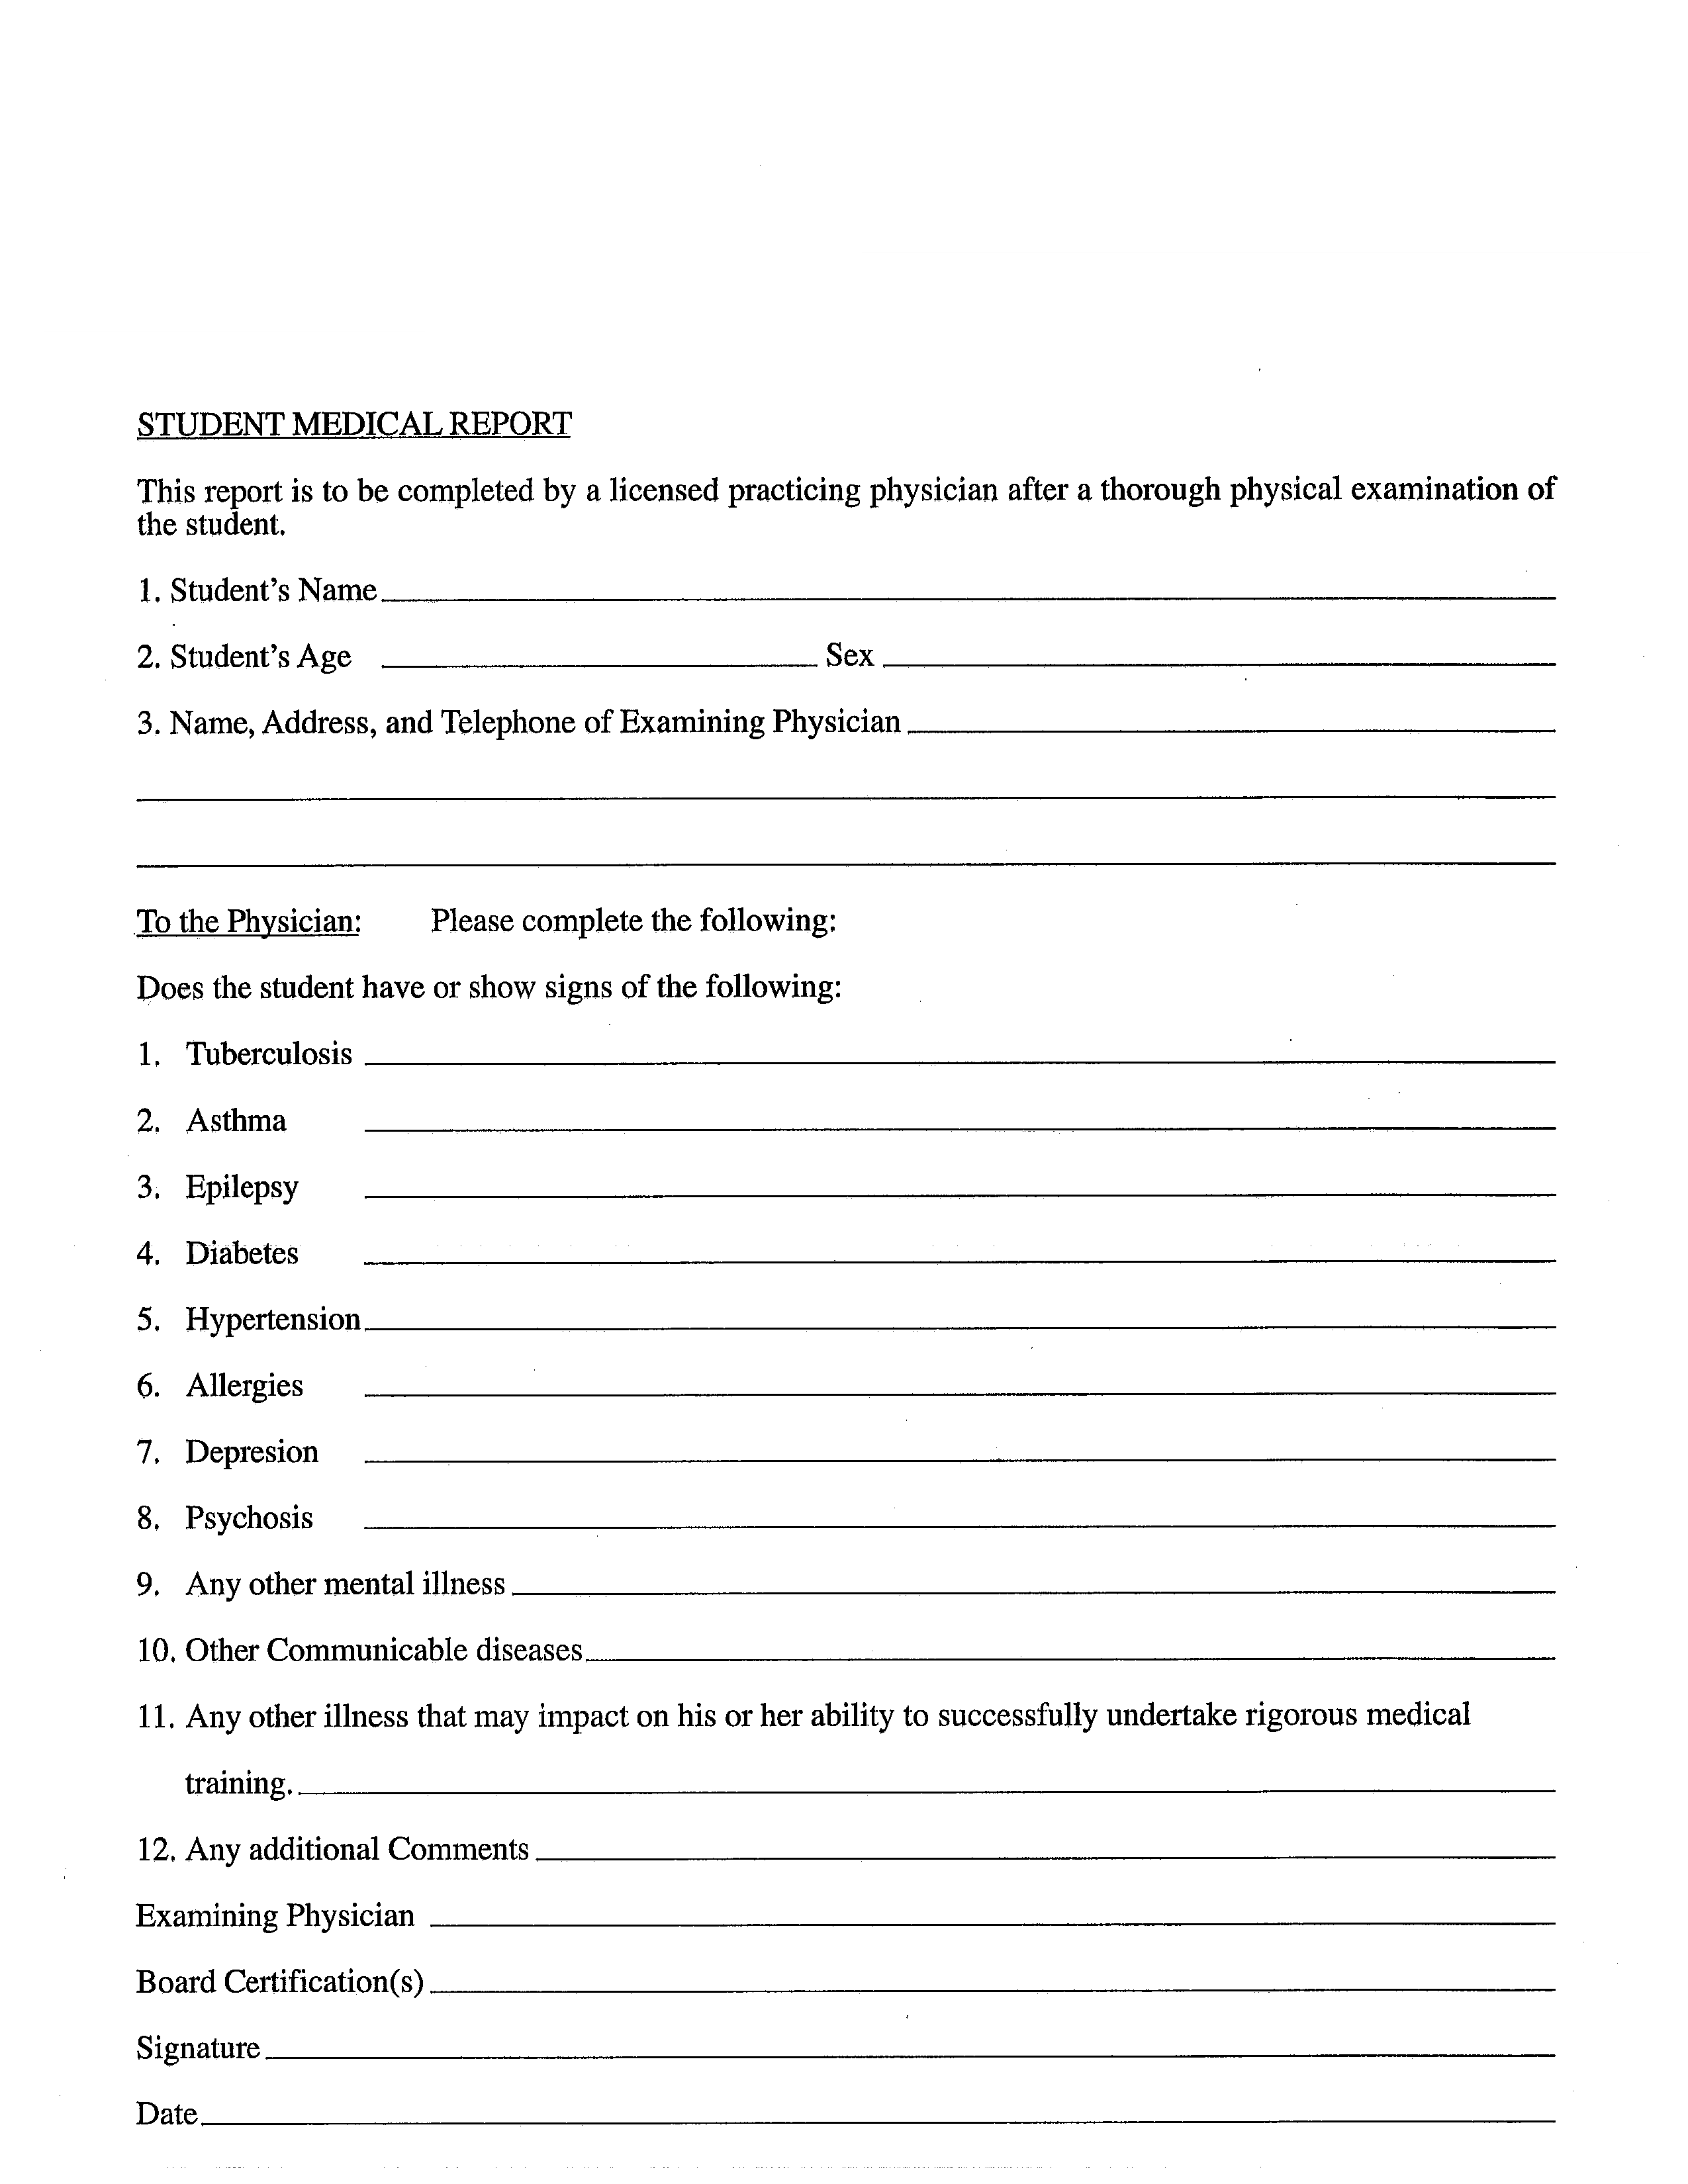 student medical report form template